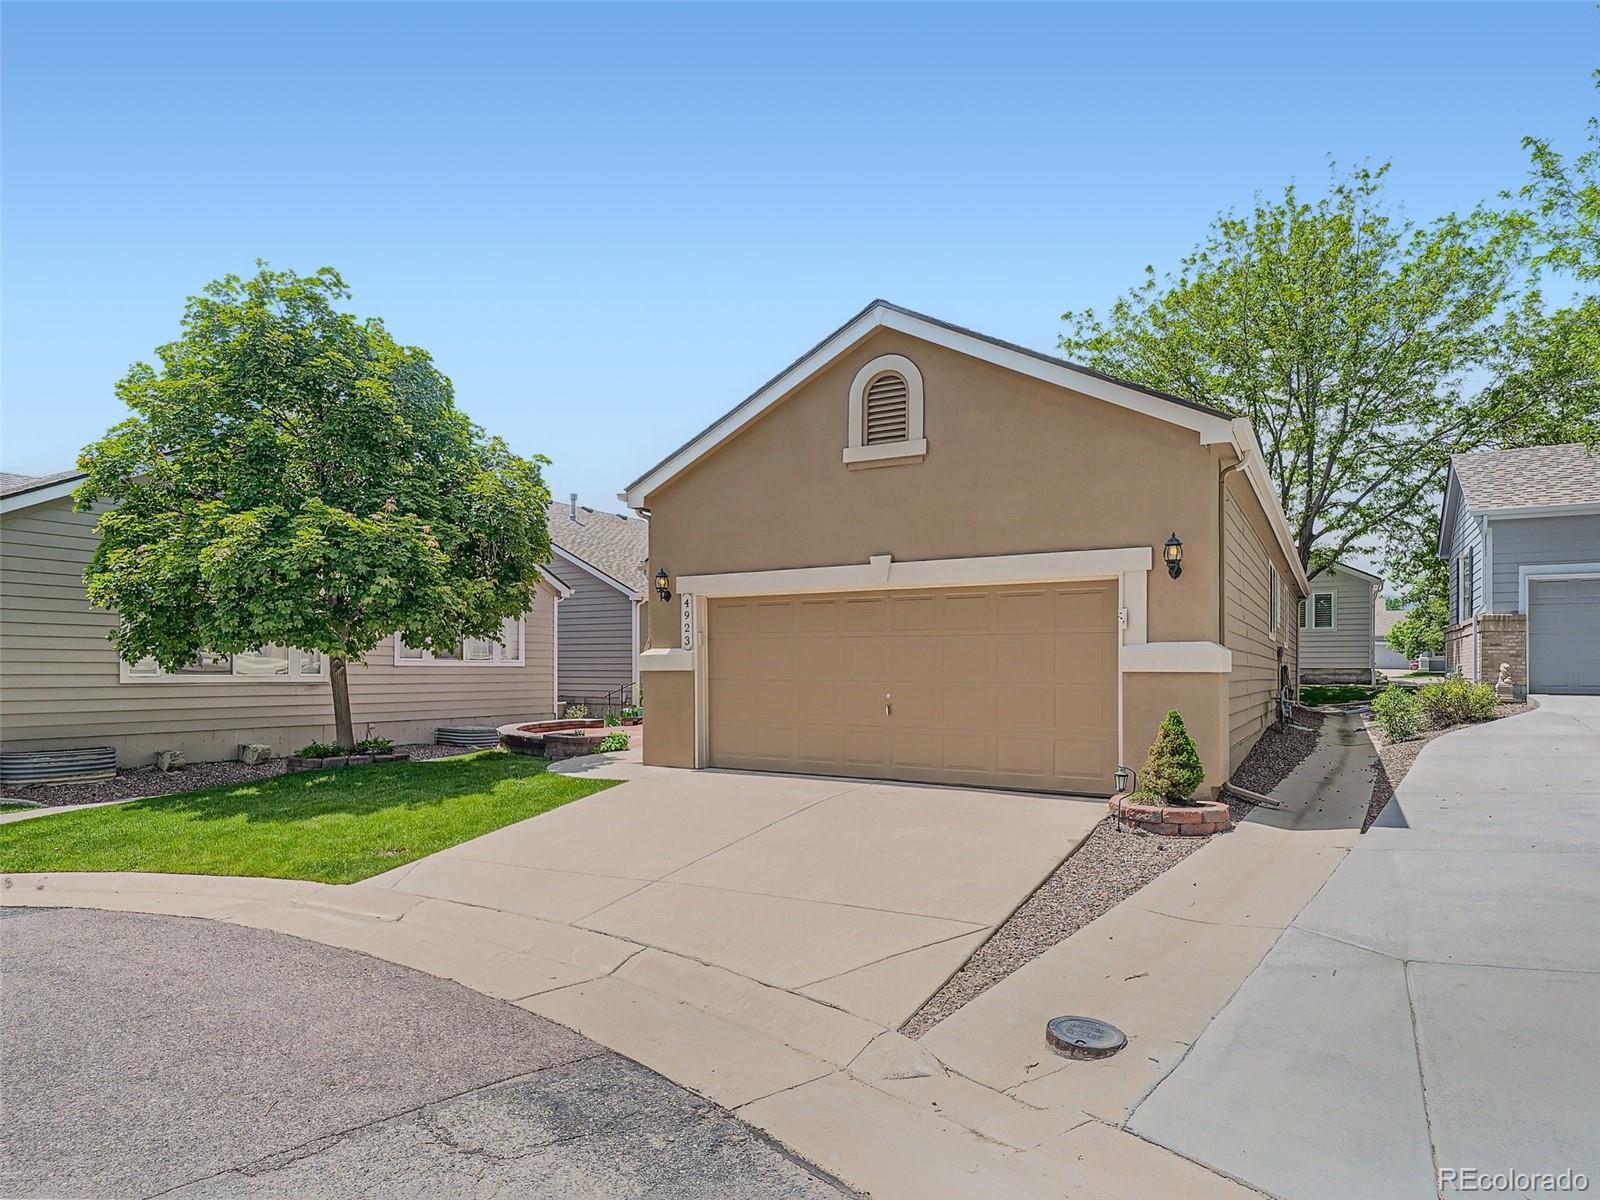 Report Image for 4923 S Nelson Court,Littleton, Colorado